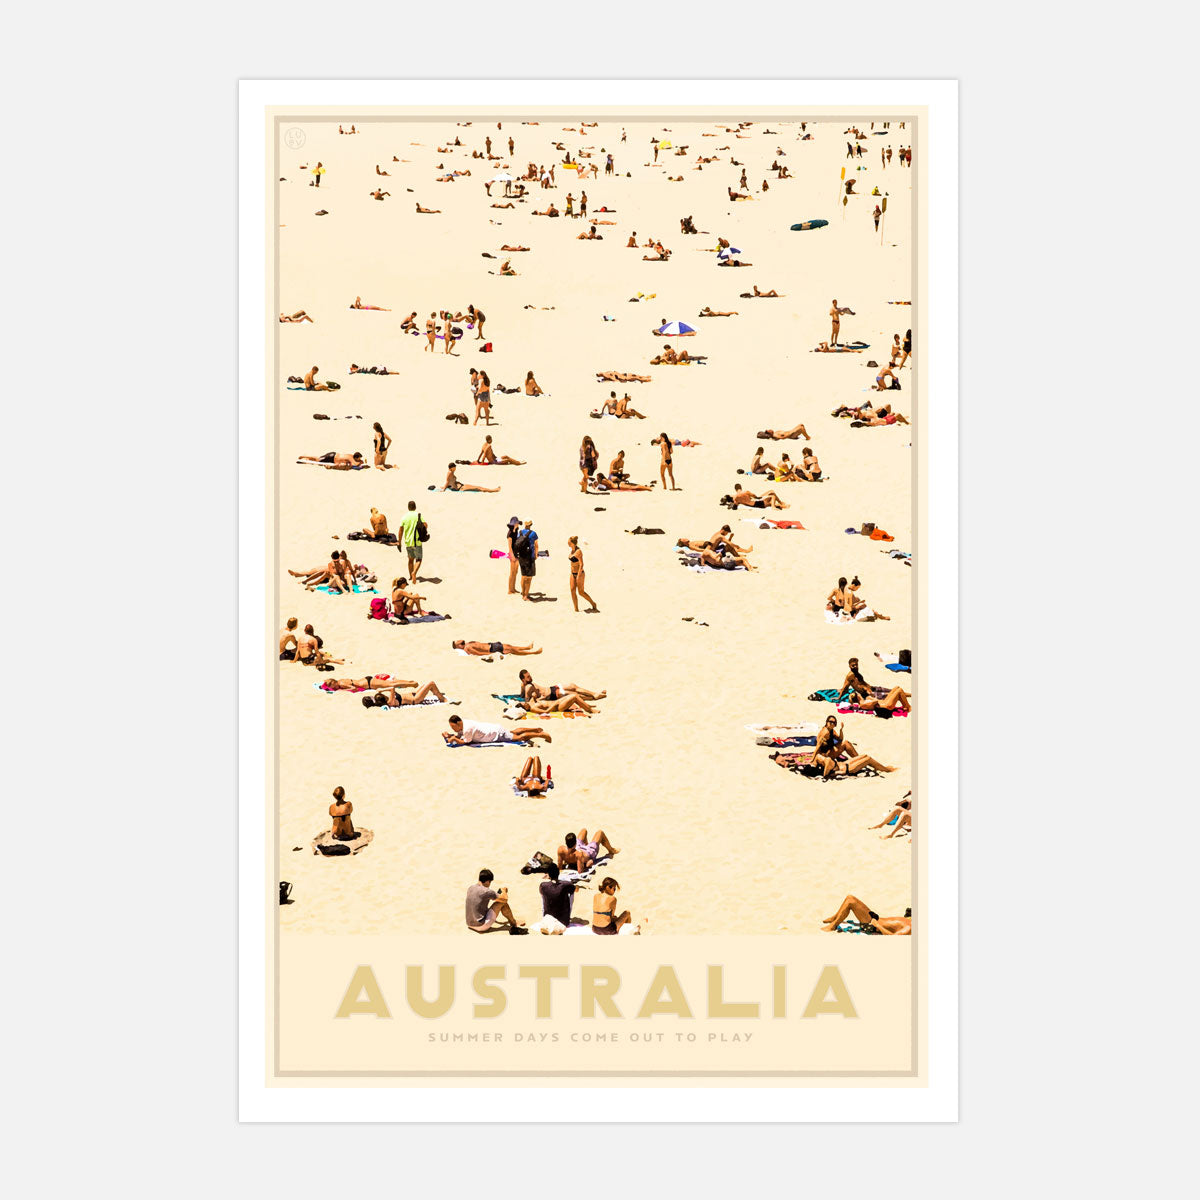 Australia Beach retro vintage poster from Places We Luv